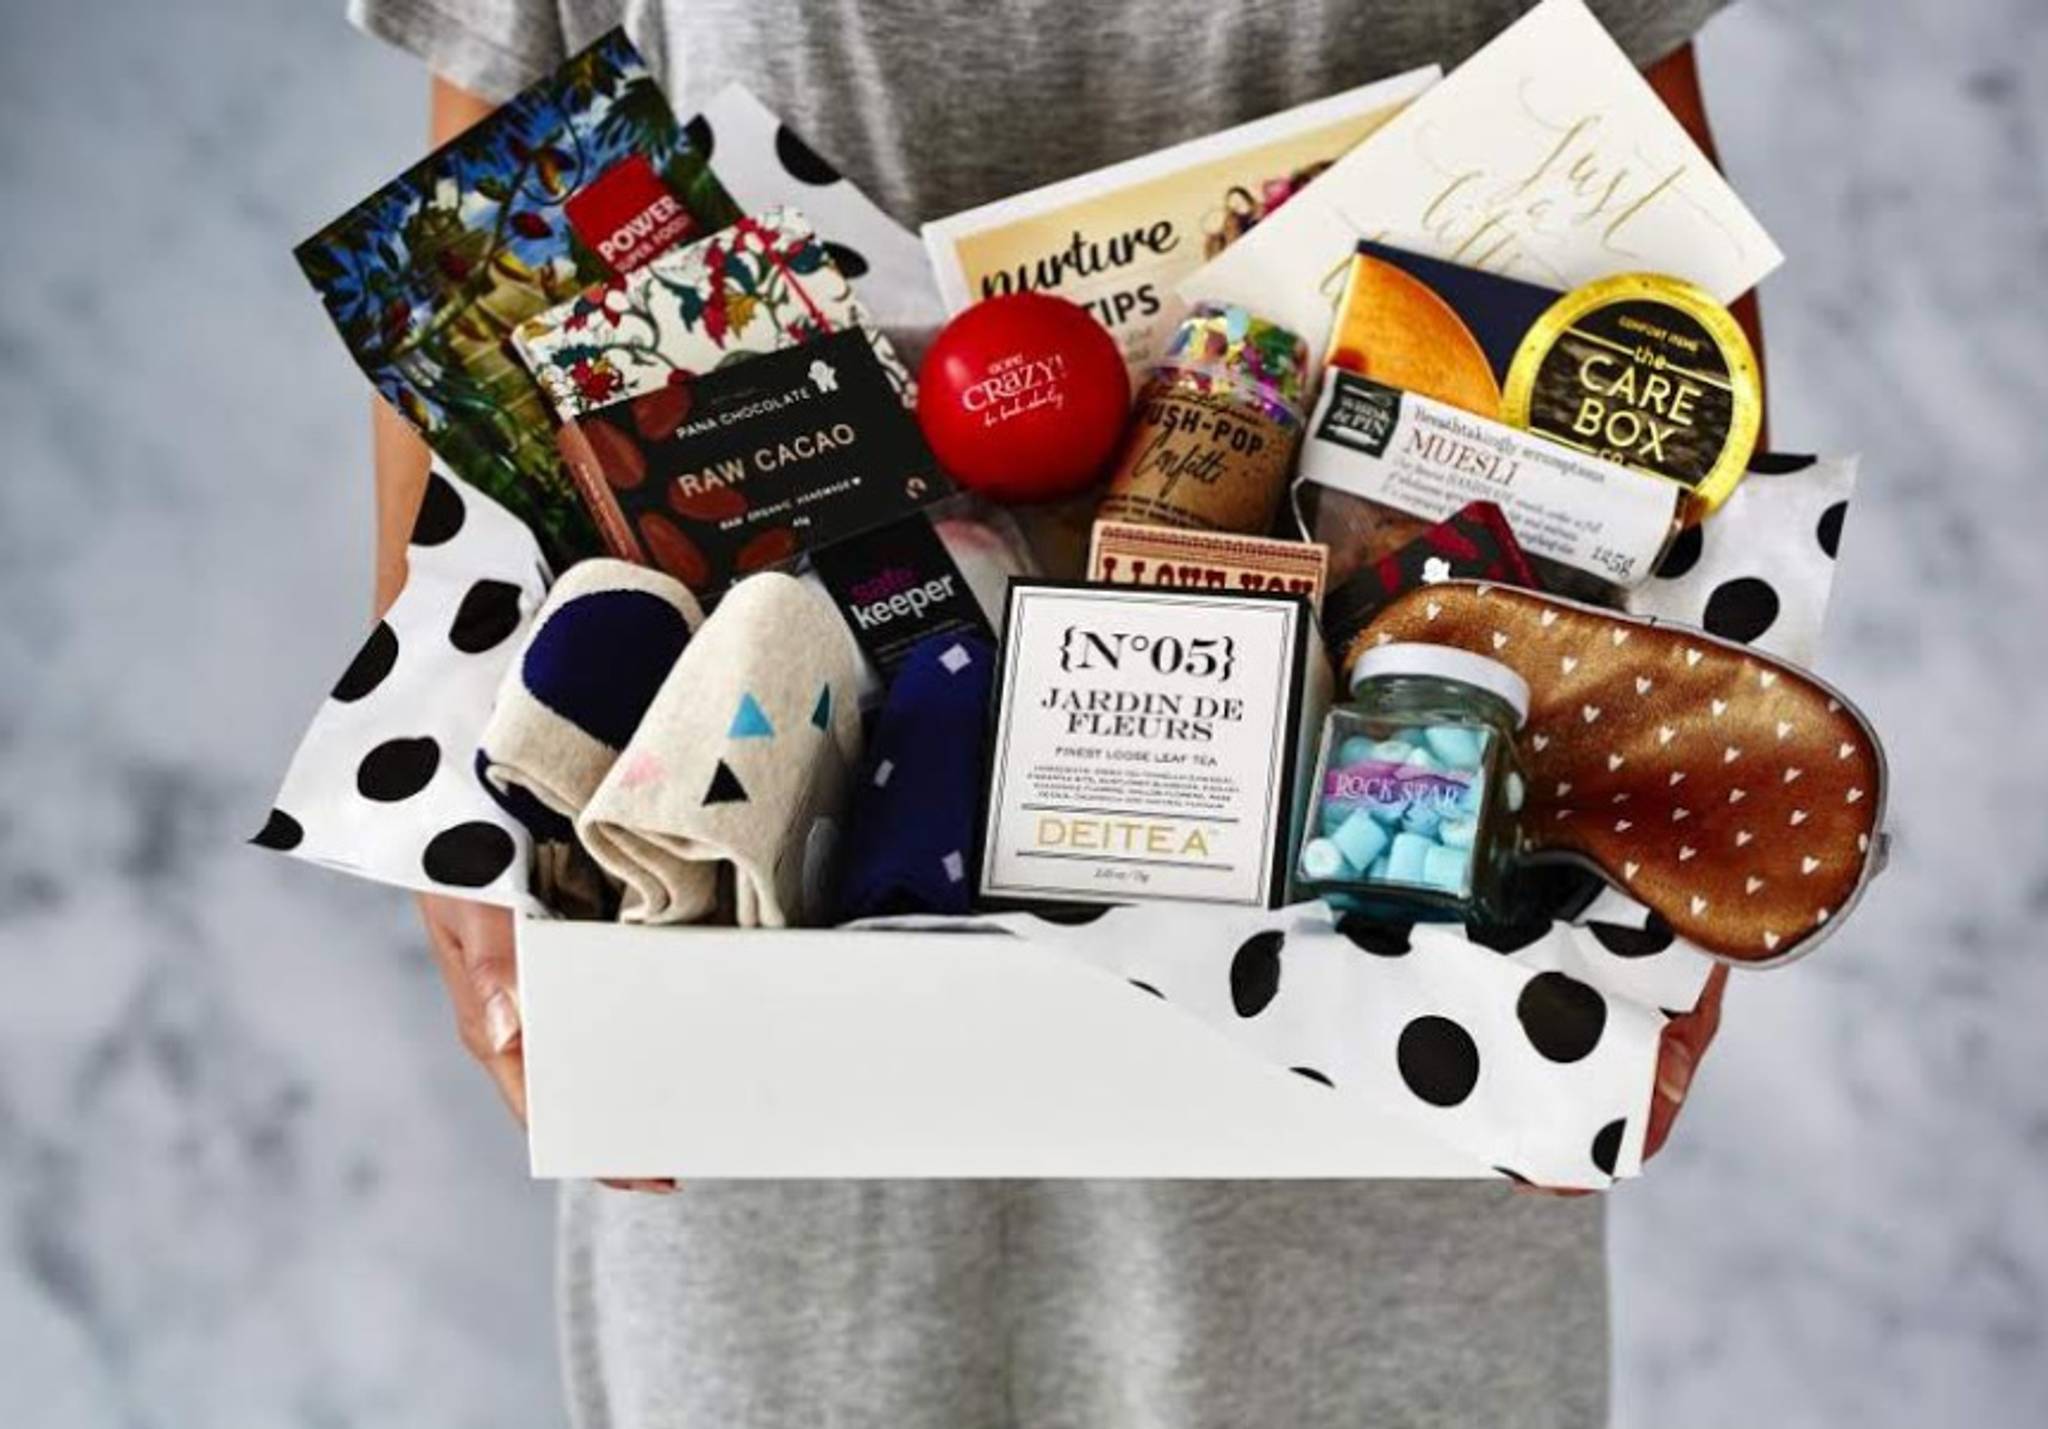 The Care Box Co. makes giving gifts easier